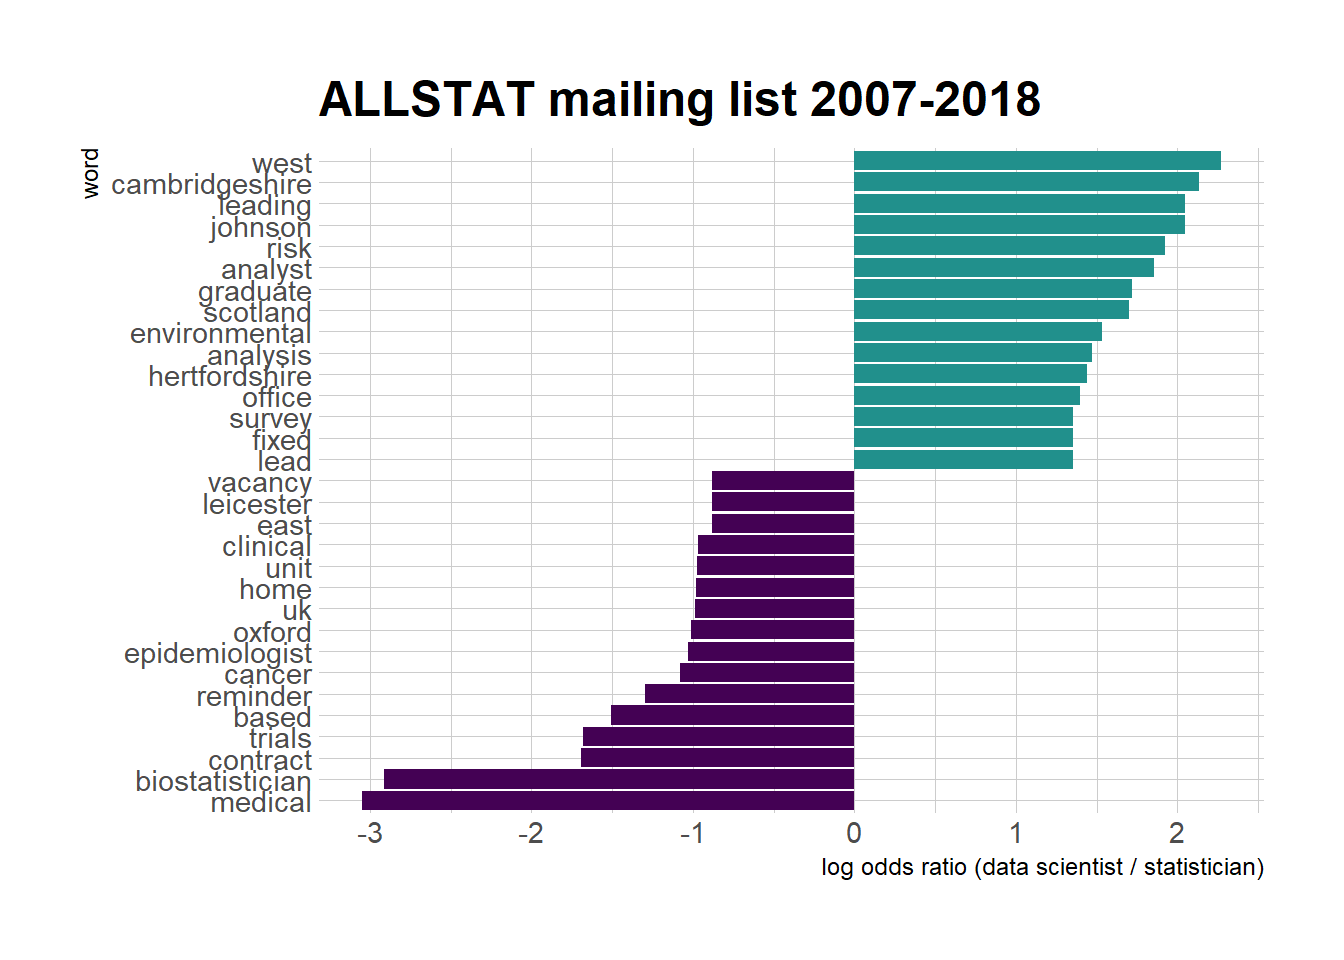 ALLSTATisticians in decline? A polite look at ALLSTAT email Archives